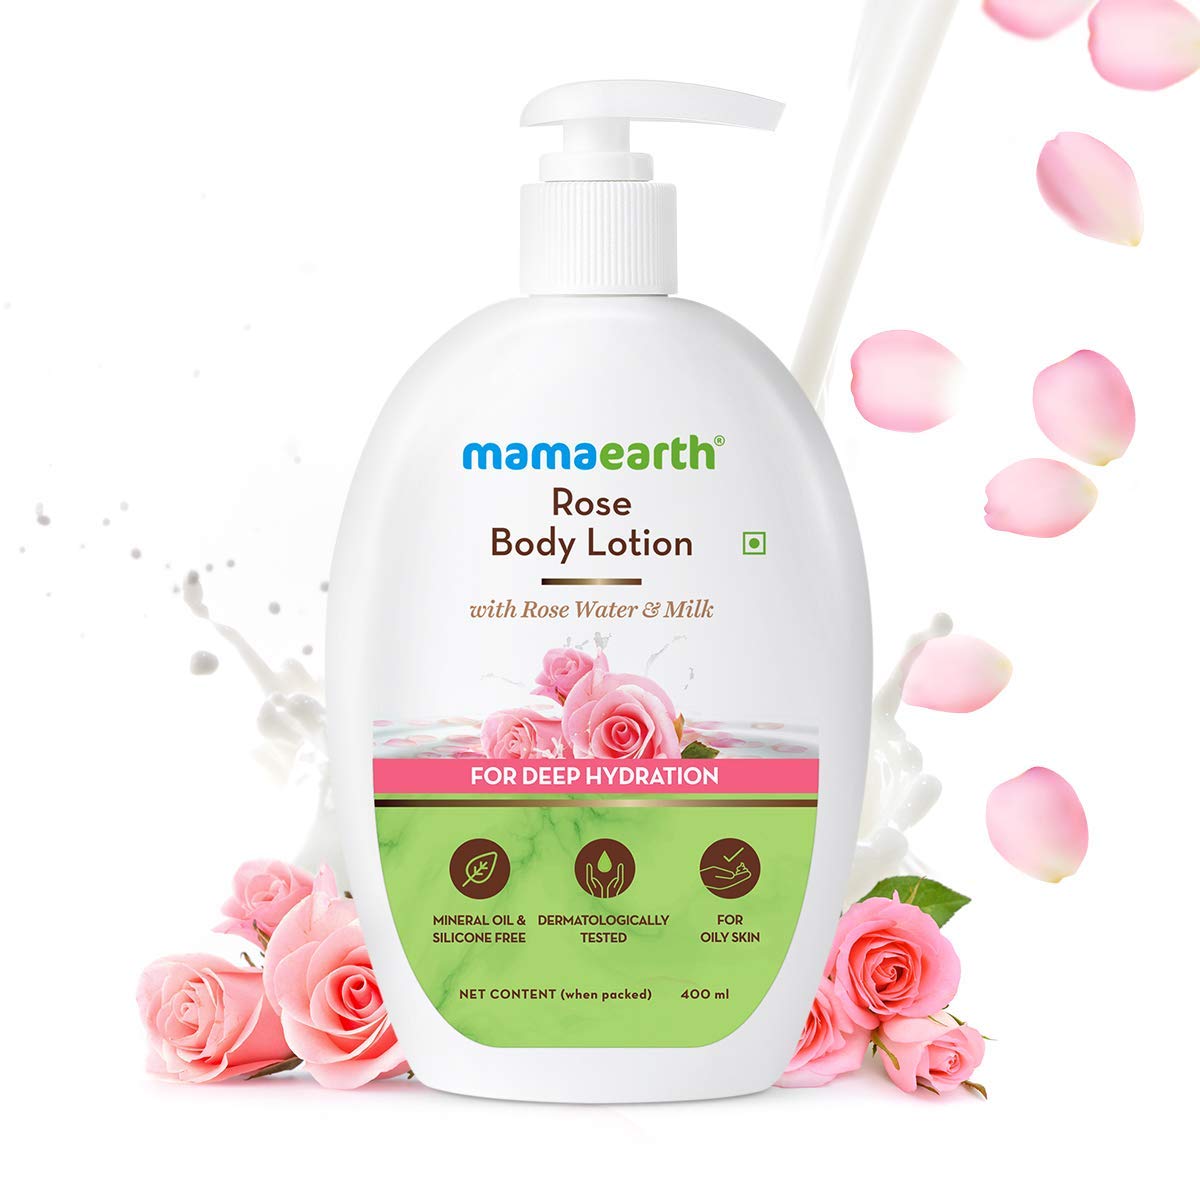 Mamaearth Rose Body Lotion for Deep Hydration - 400ml